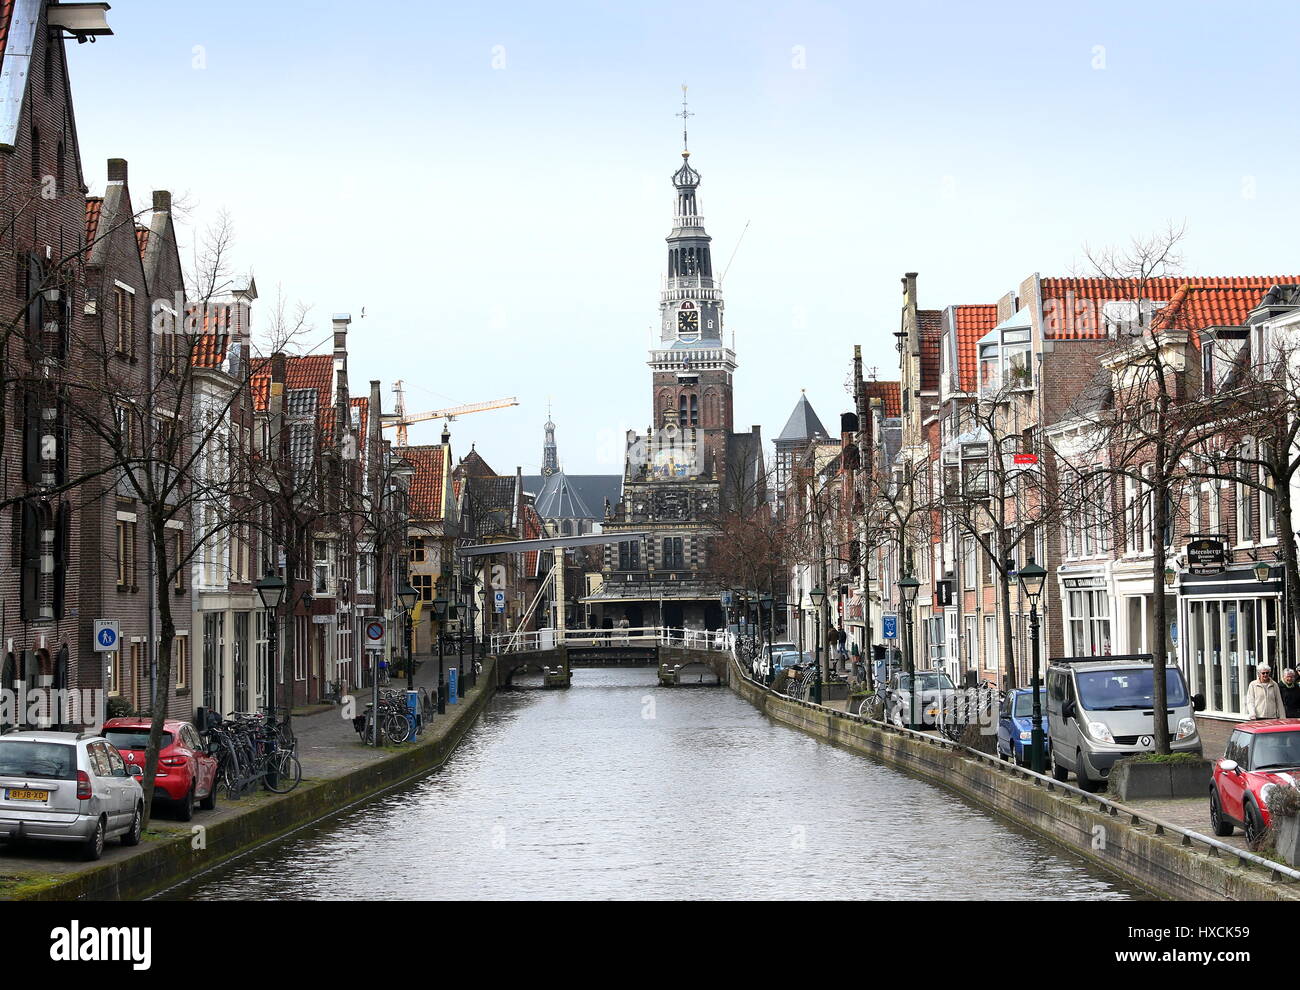 De Waag (Weighing house) at Waagplein square in Alkmaar, The Netherlands. Seen from Luttik Oudorp canal. Stock Photo